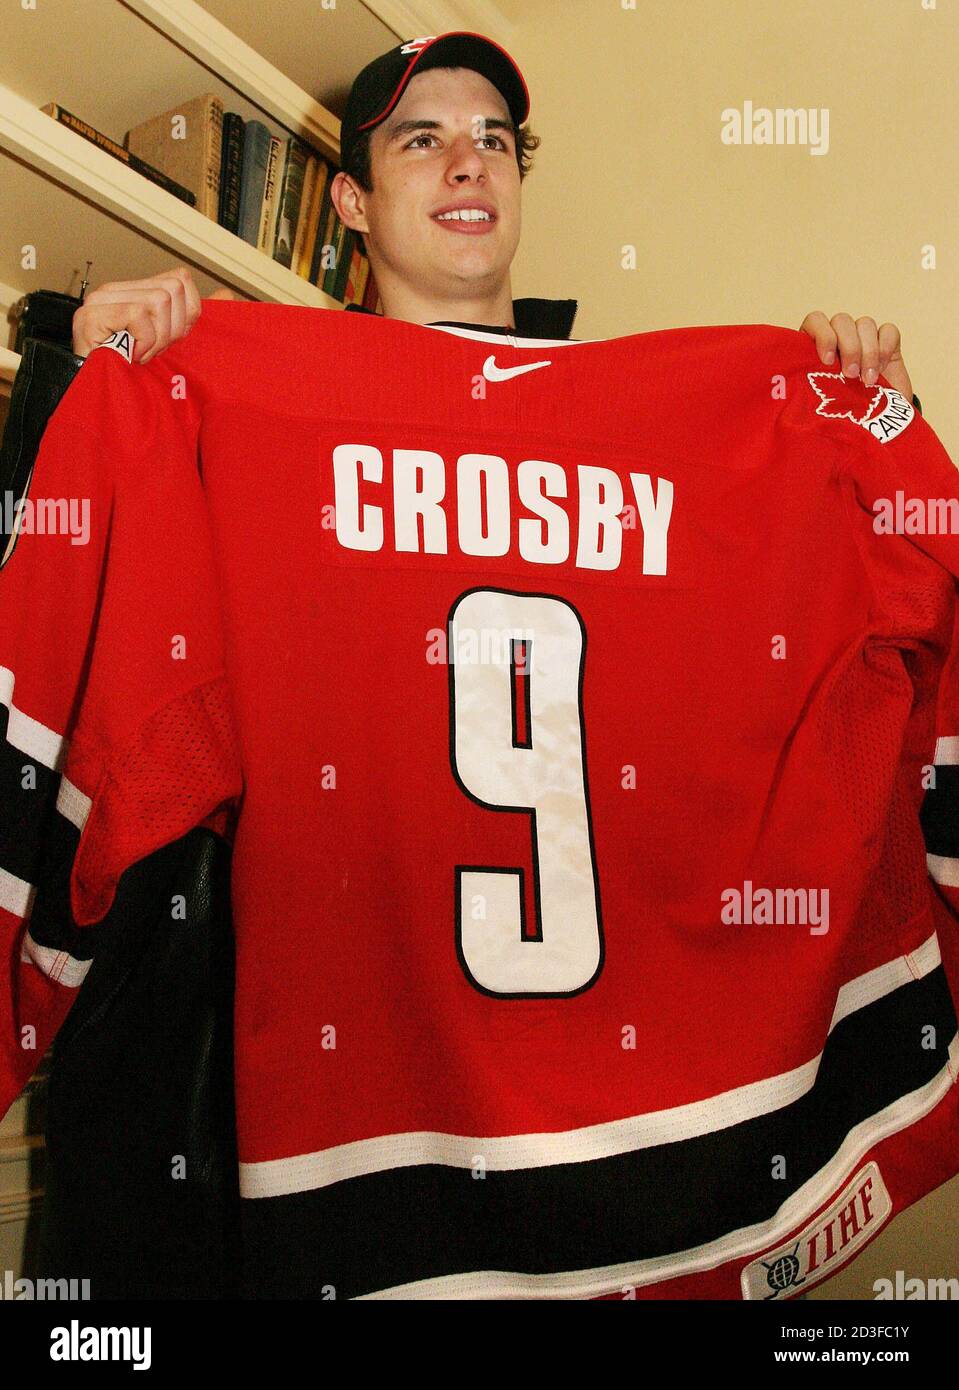 Sidney Crosby holds up his Team Canada jersey during a press conference in  Halifax, Nova Scotia on January 13, 2005. The jersey was recovered after  being stolen from his luggage during his